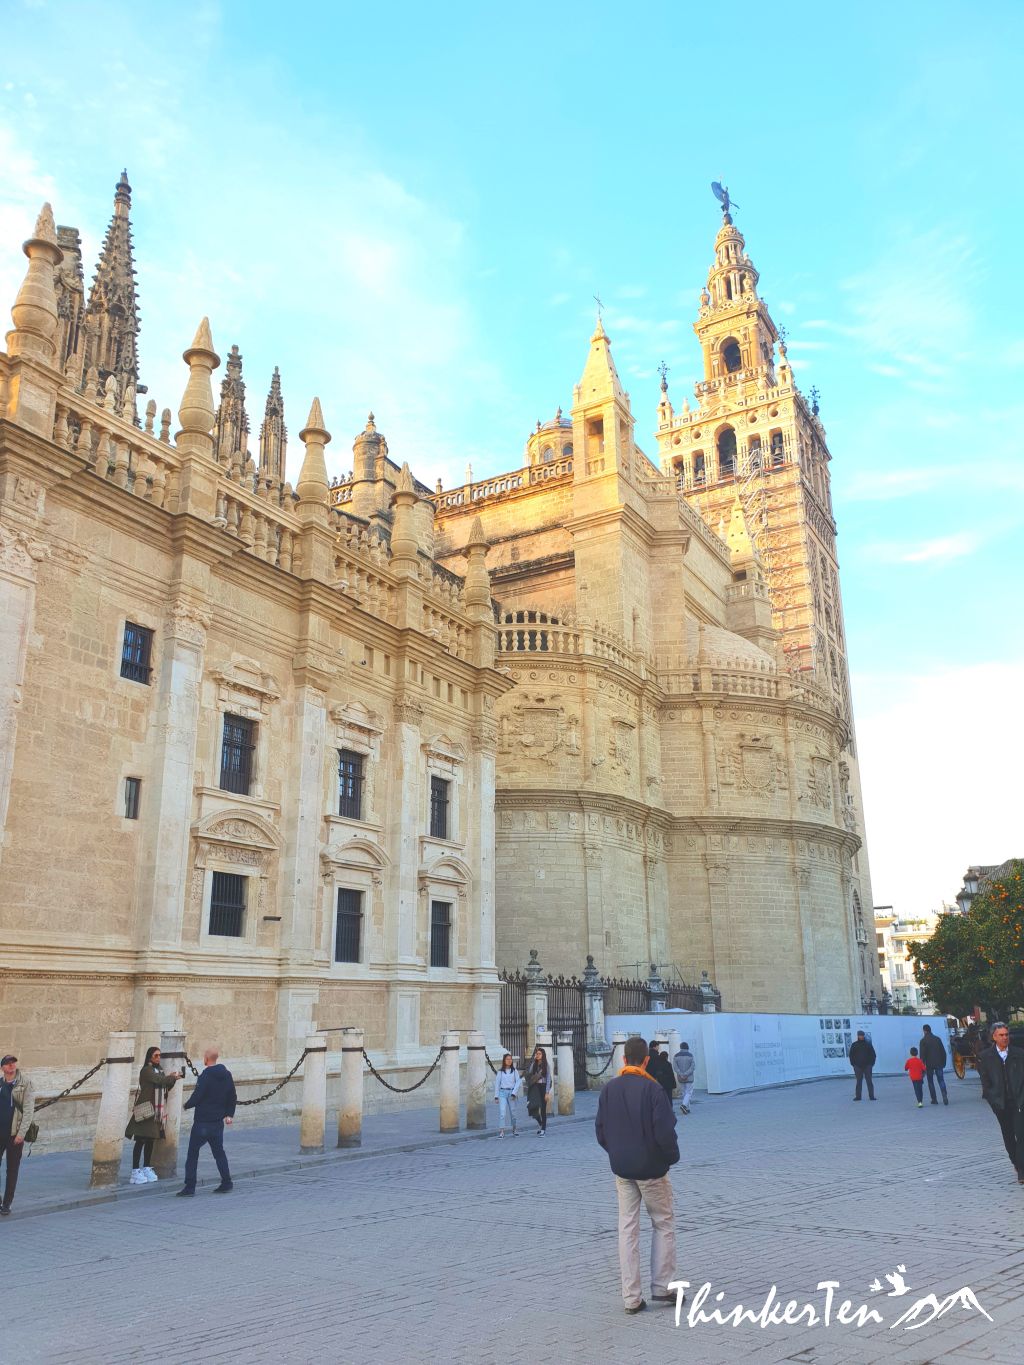 Seville Cathedral and Giralda Tower at Seville, Spain